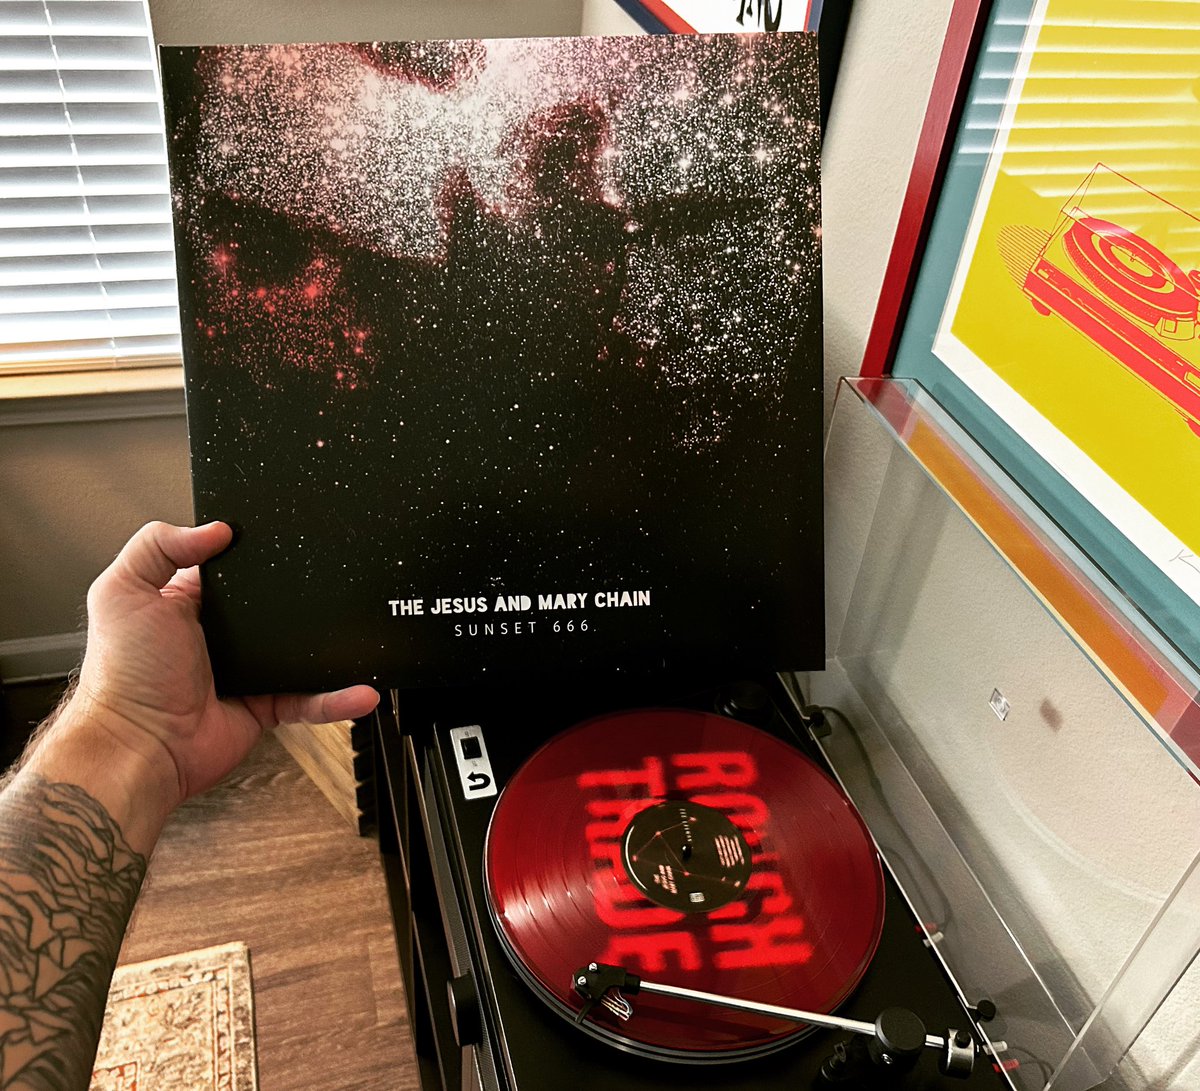 Kicking off my morning with the newly released Sunset 666 (Live At The Hollywood Palladium), a live album by The Jesus & Mary Chain recorded in 2018. #thejesusandmarychain #vinyl